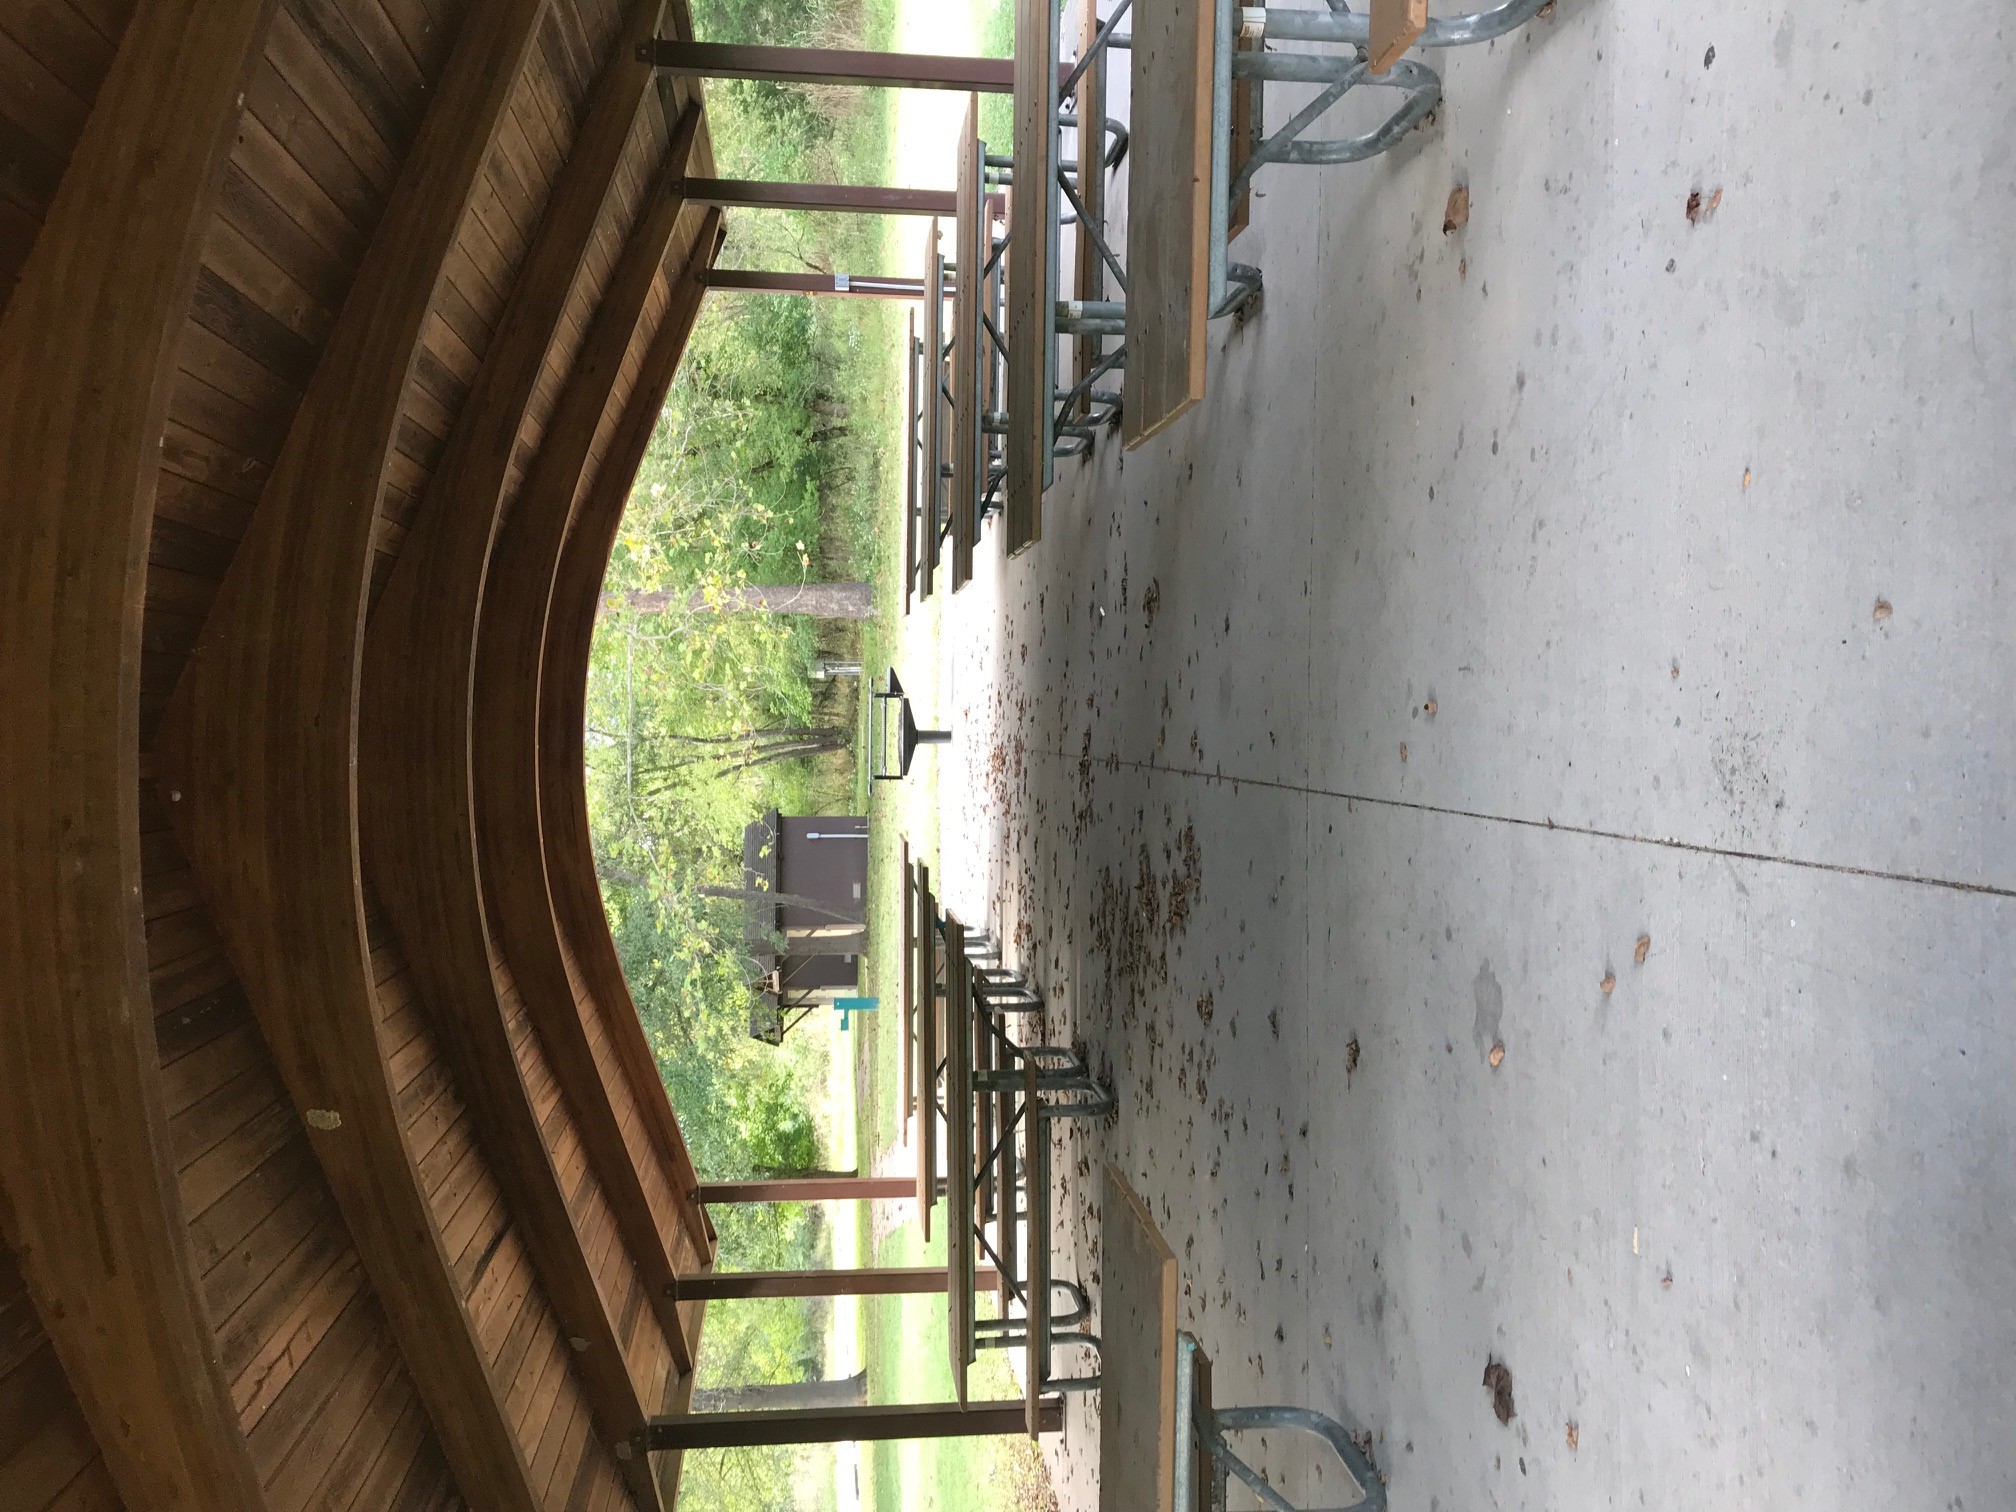 Two rows of picnic tables under the roof of the open shelter, with a grill, water fountain and restroom in the backcground